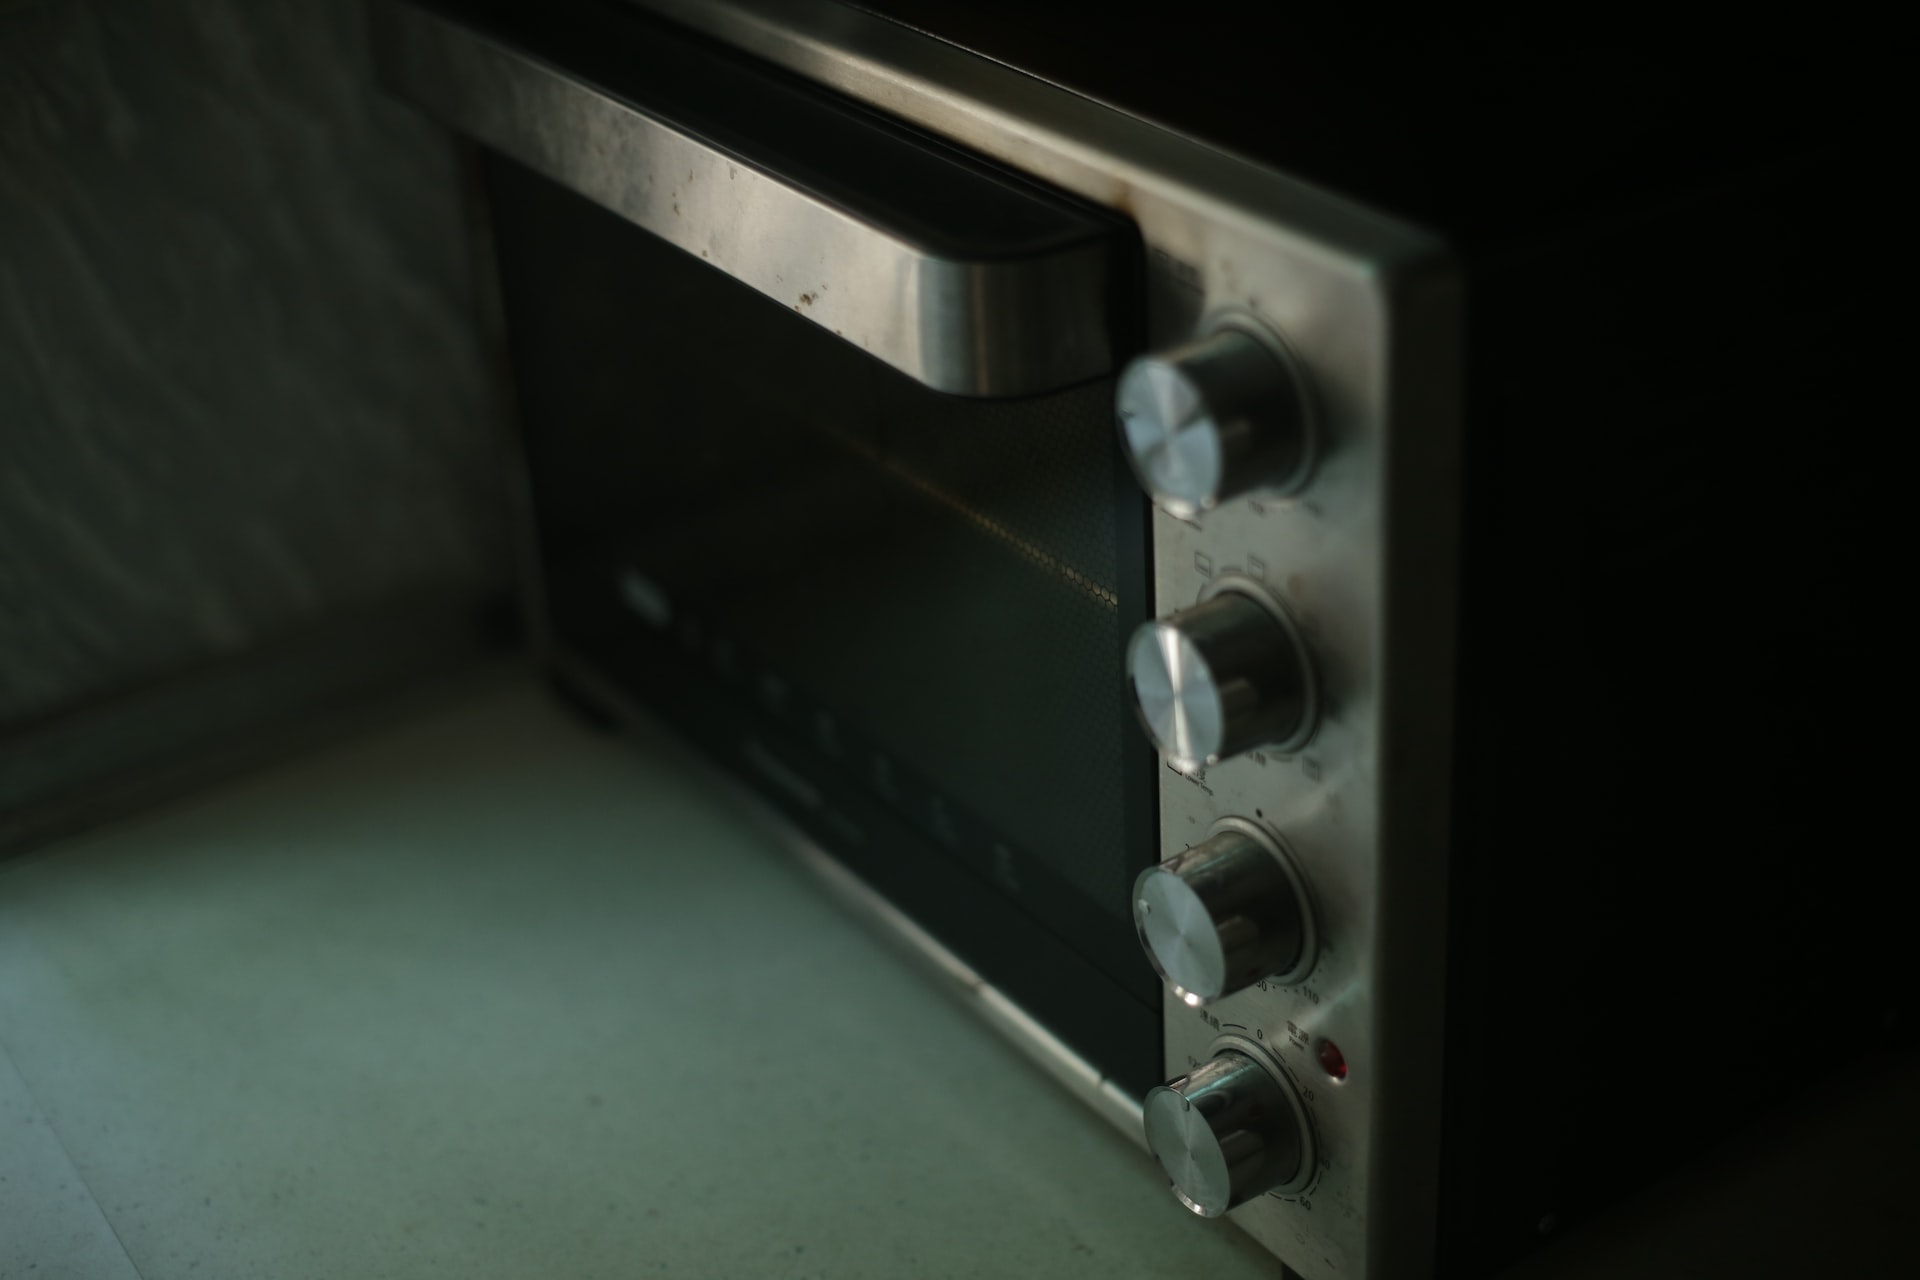 How Does the Microwave Work?